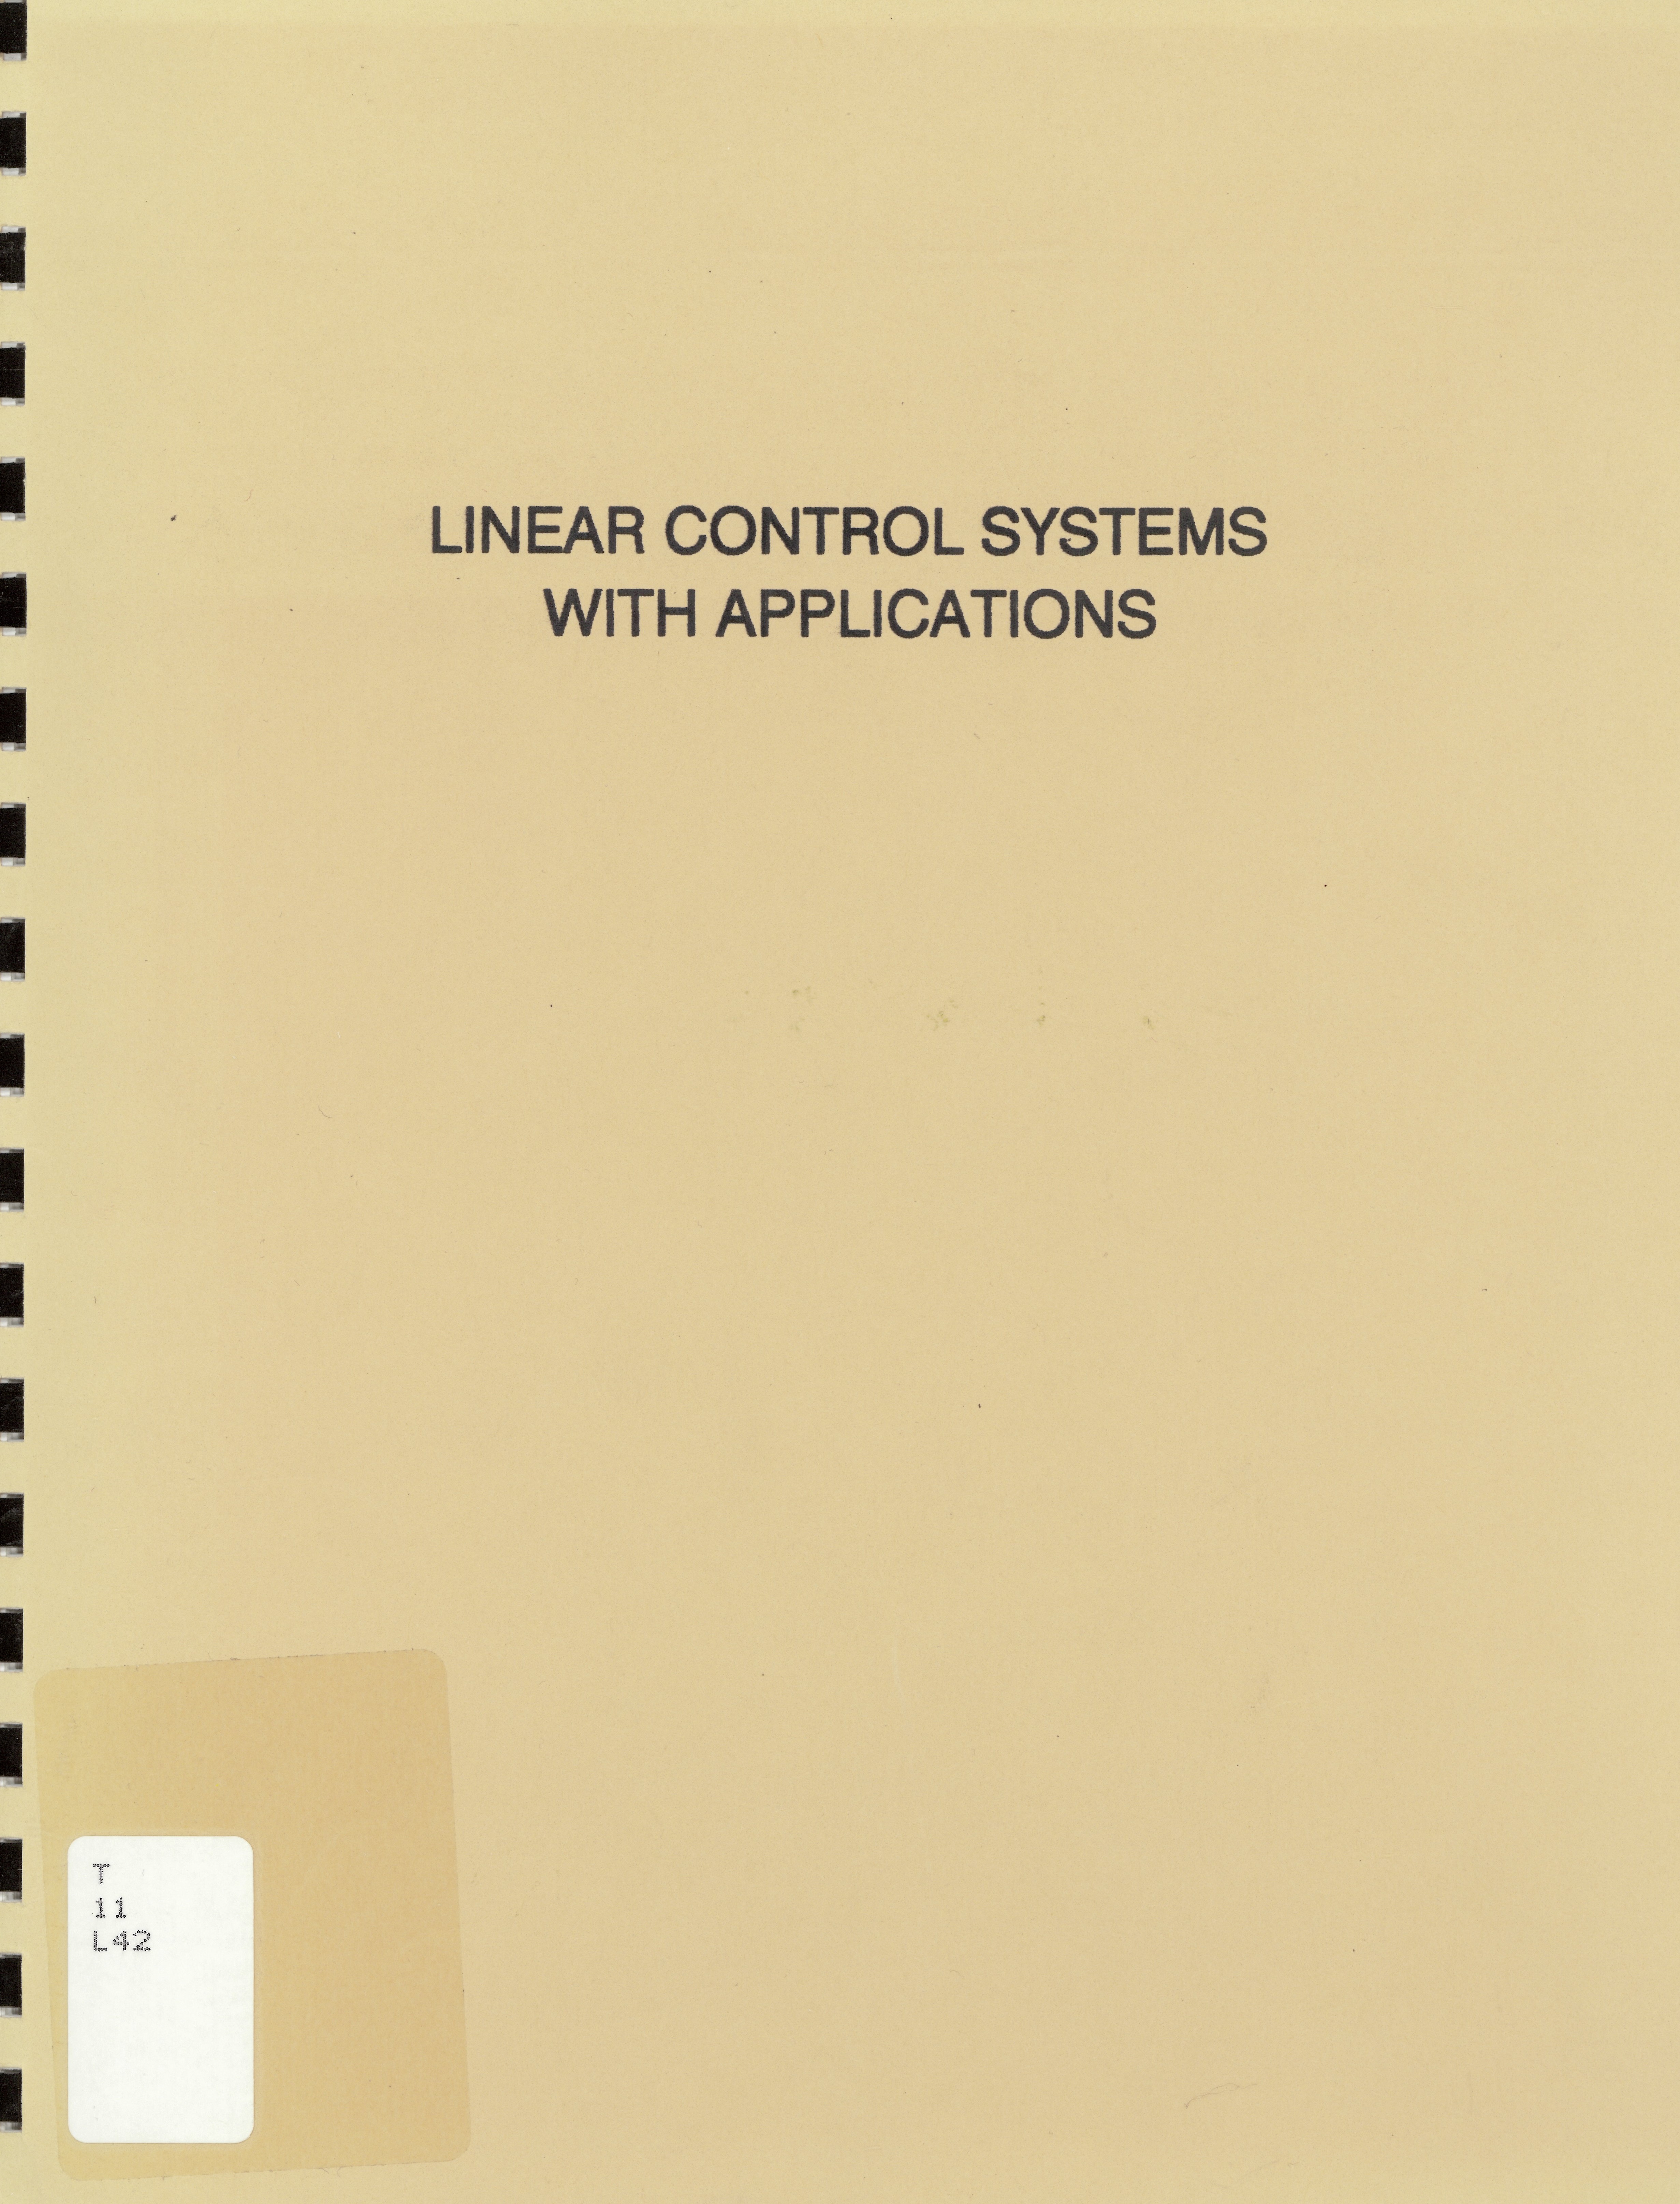 Linear control systems with applications